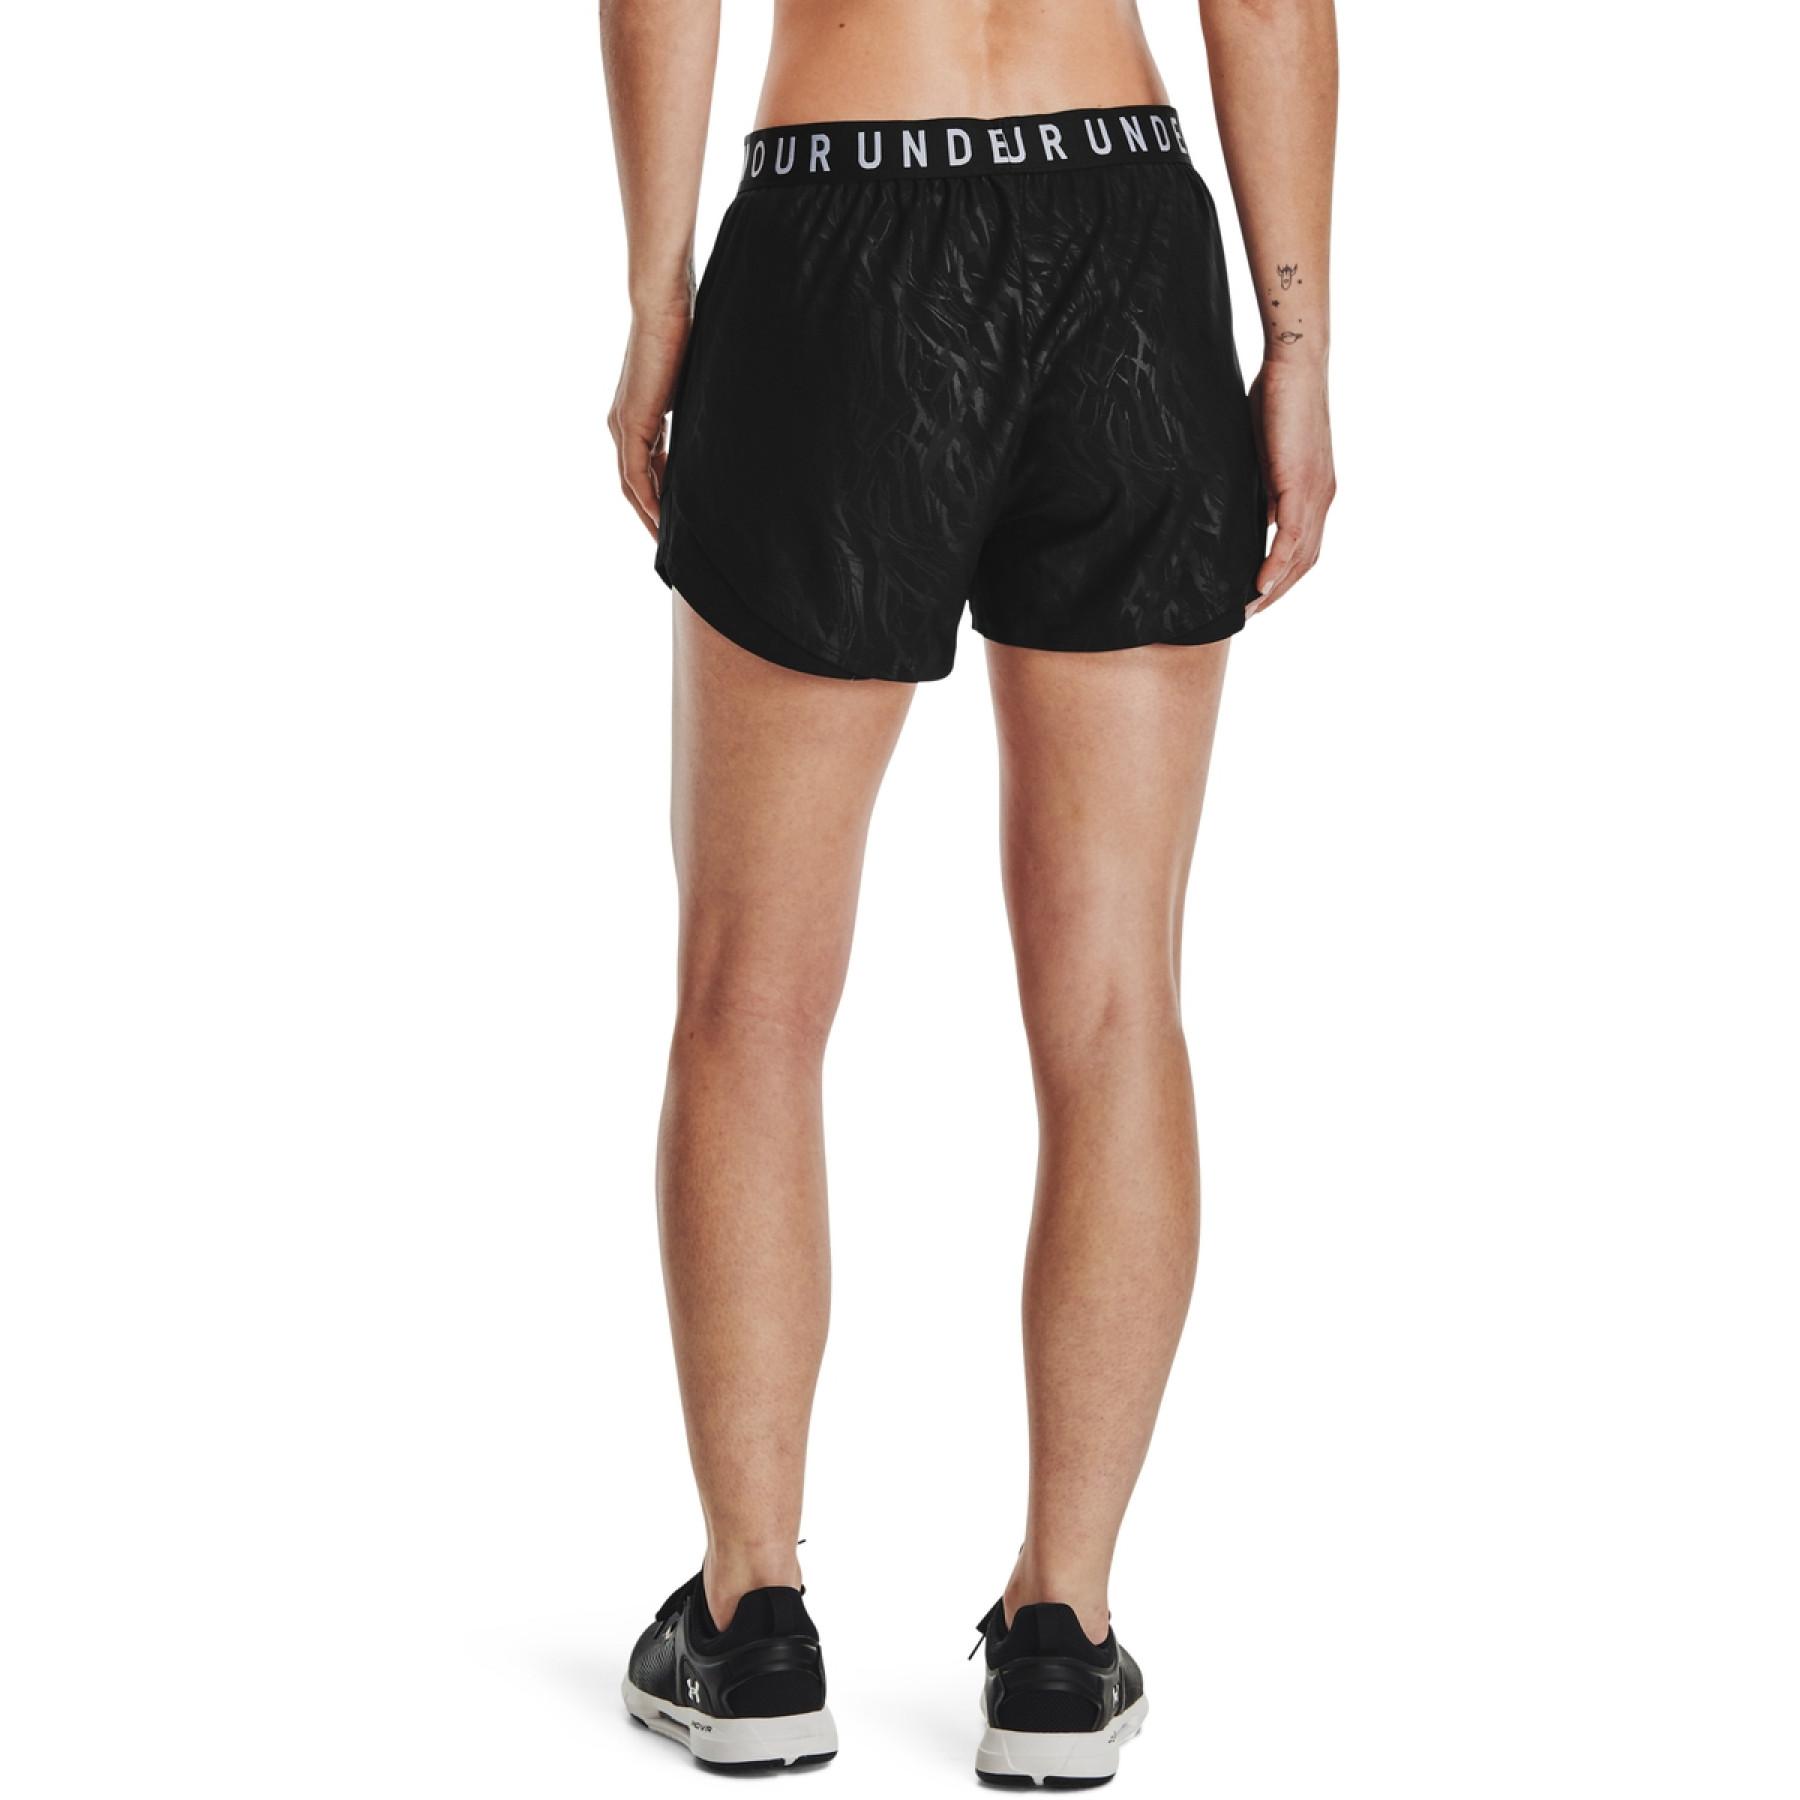 Women's shorts Under Armour play up 3.0 emboss